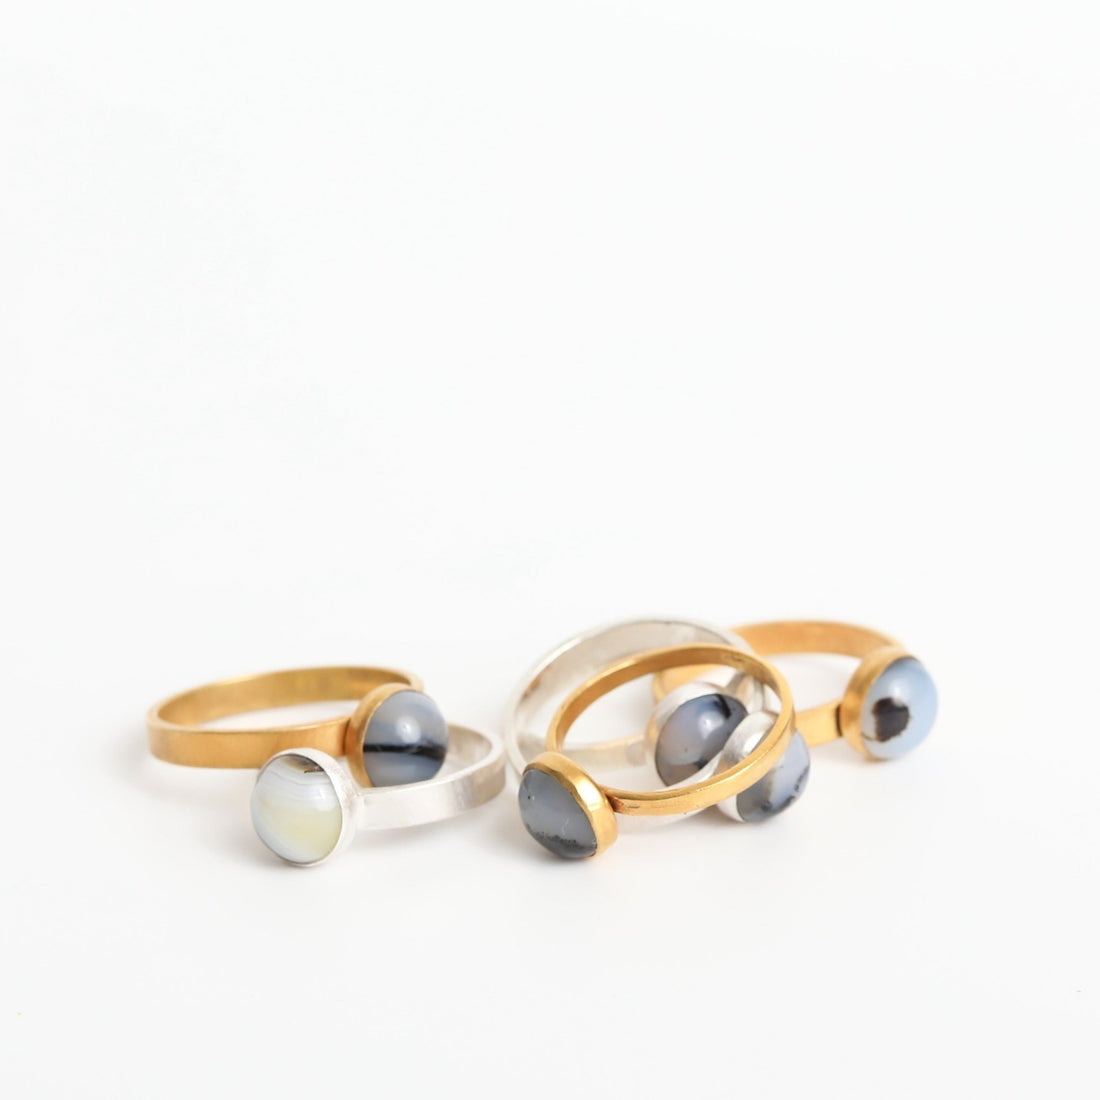 Sunshowers Dendritic Agate Stacking Ring - Chocolate and Steel - 14kt gold vermeil - 414faire - blue gemstone - Ring